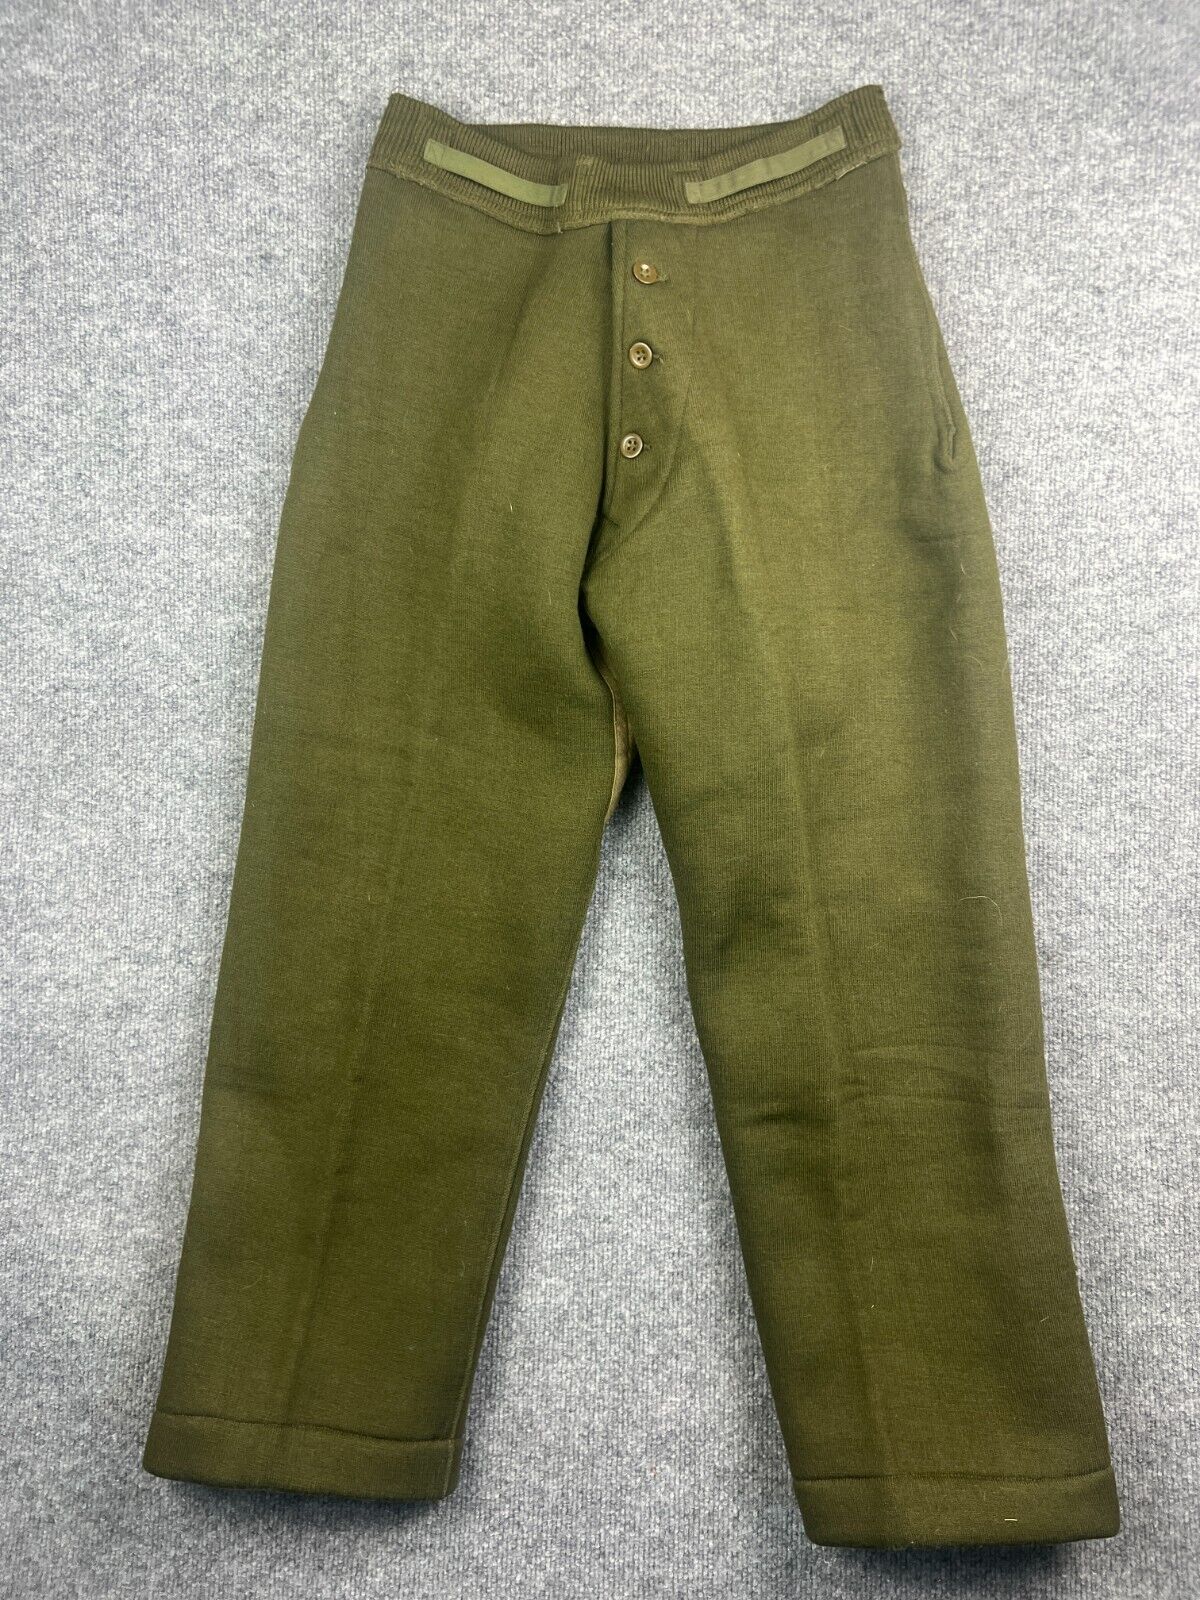 H&E Ltd Leicester 50s Trousers Inner Army Winter Trousers Liner Fleece Wool